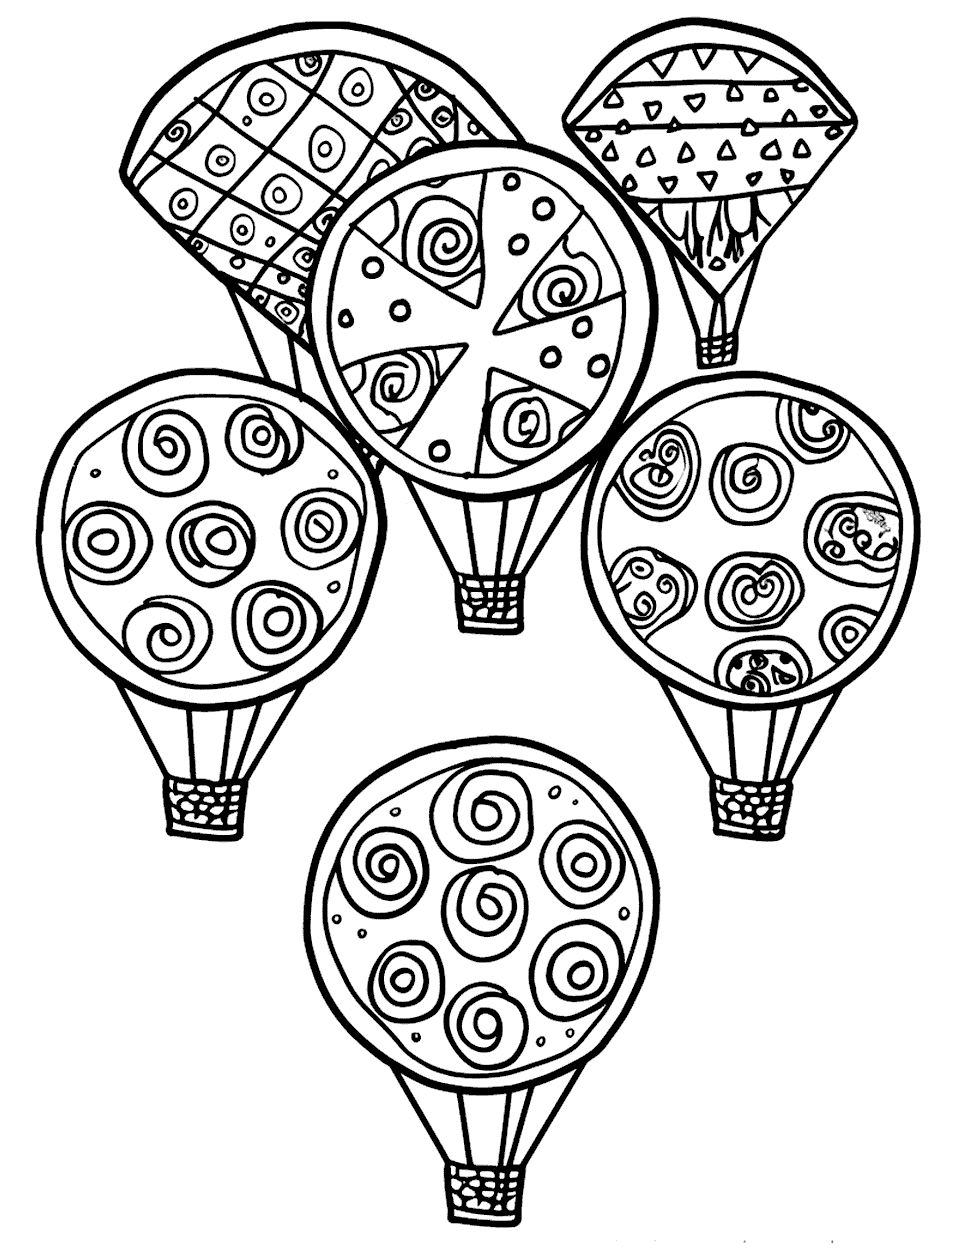 Pizza Balloon Fiesta Coloring Page - Hot air balloons shaped like pizza slices floating in the sky.